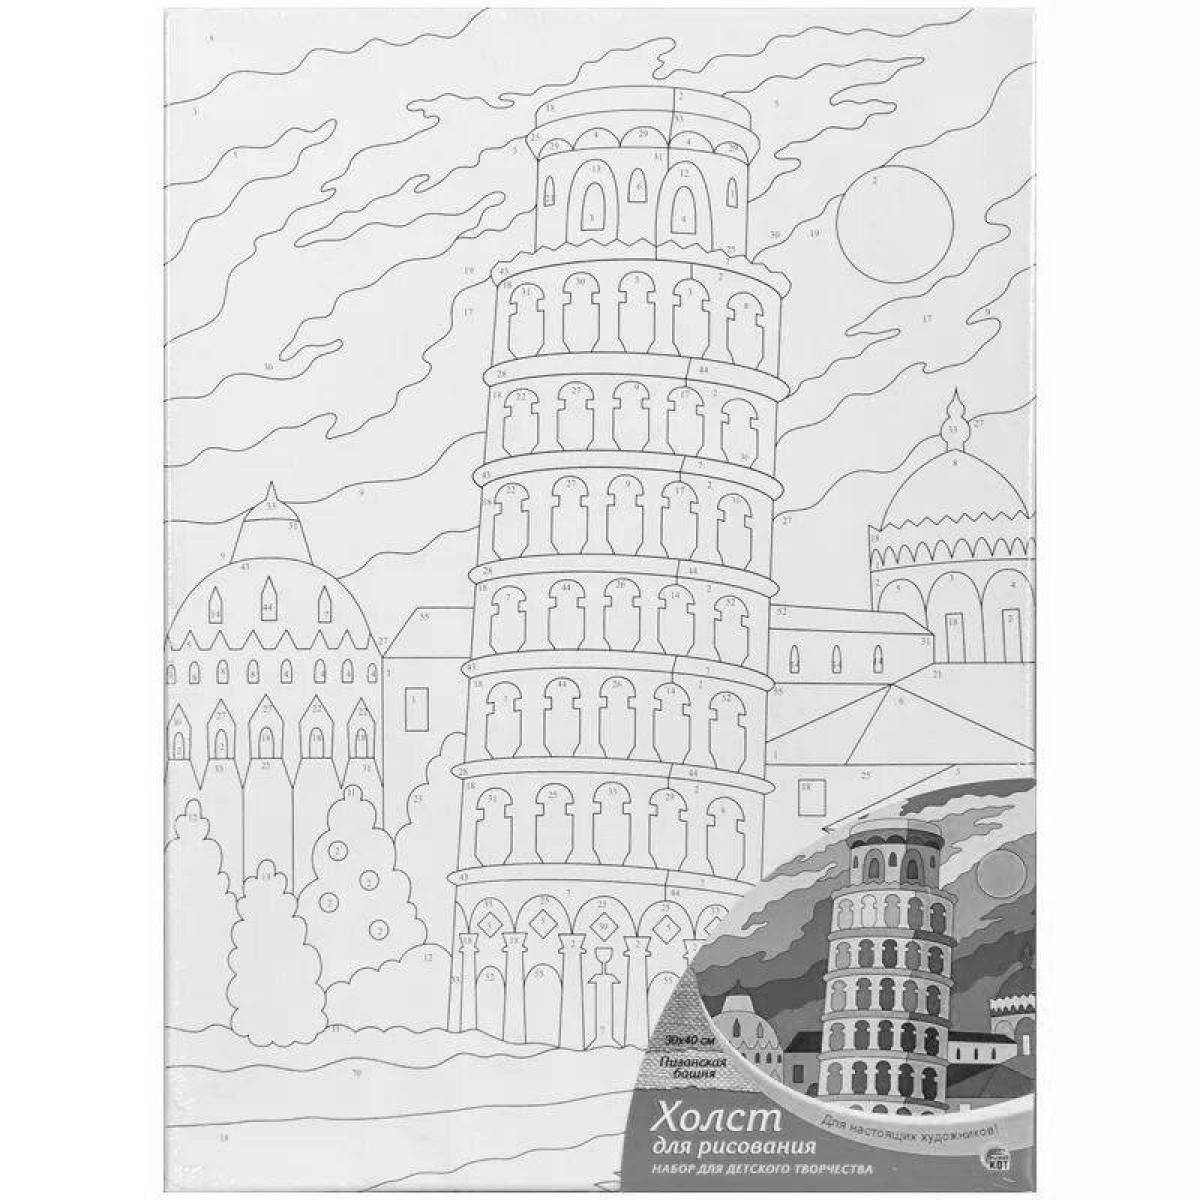 Coloring the Leaning Tower of Pisa